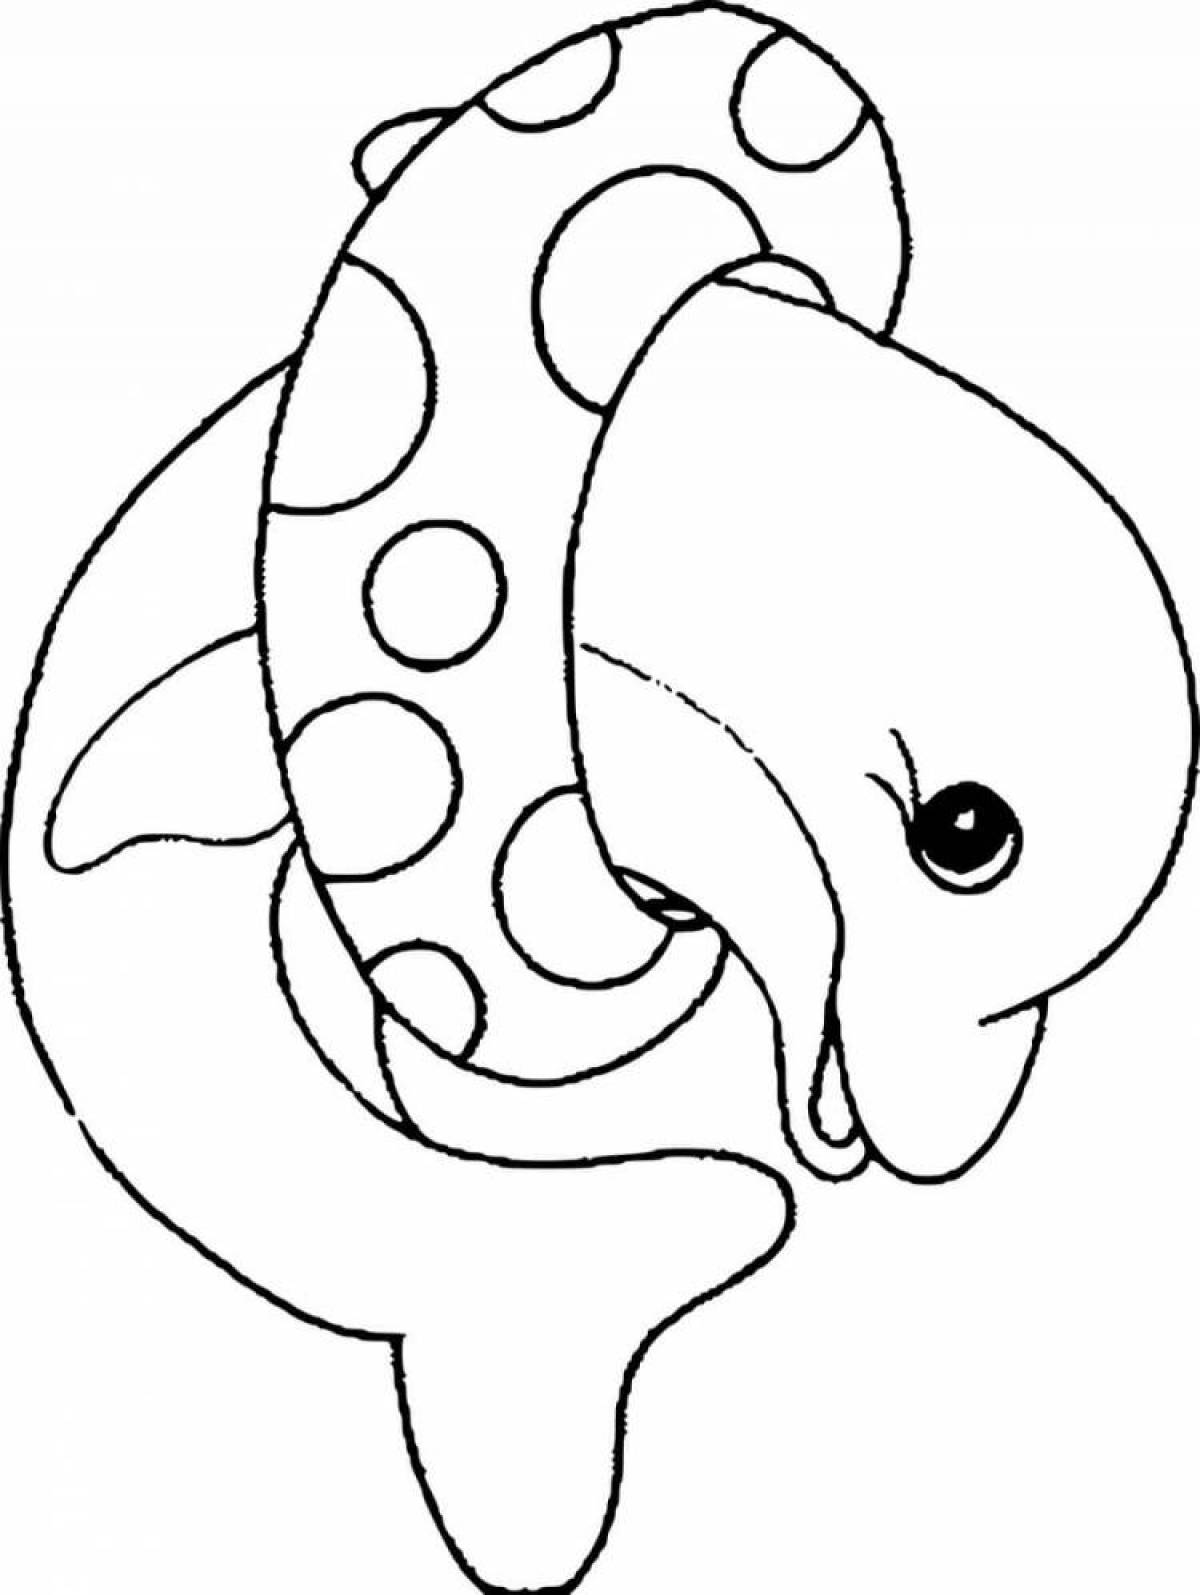 Amazing dolphin coloring pages for kids